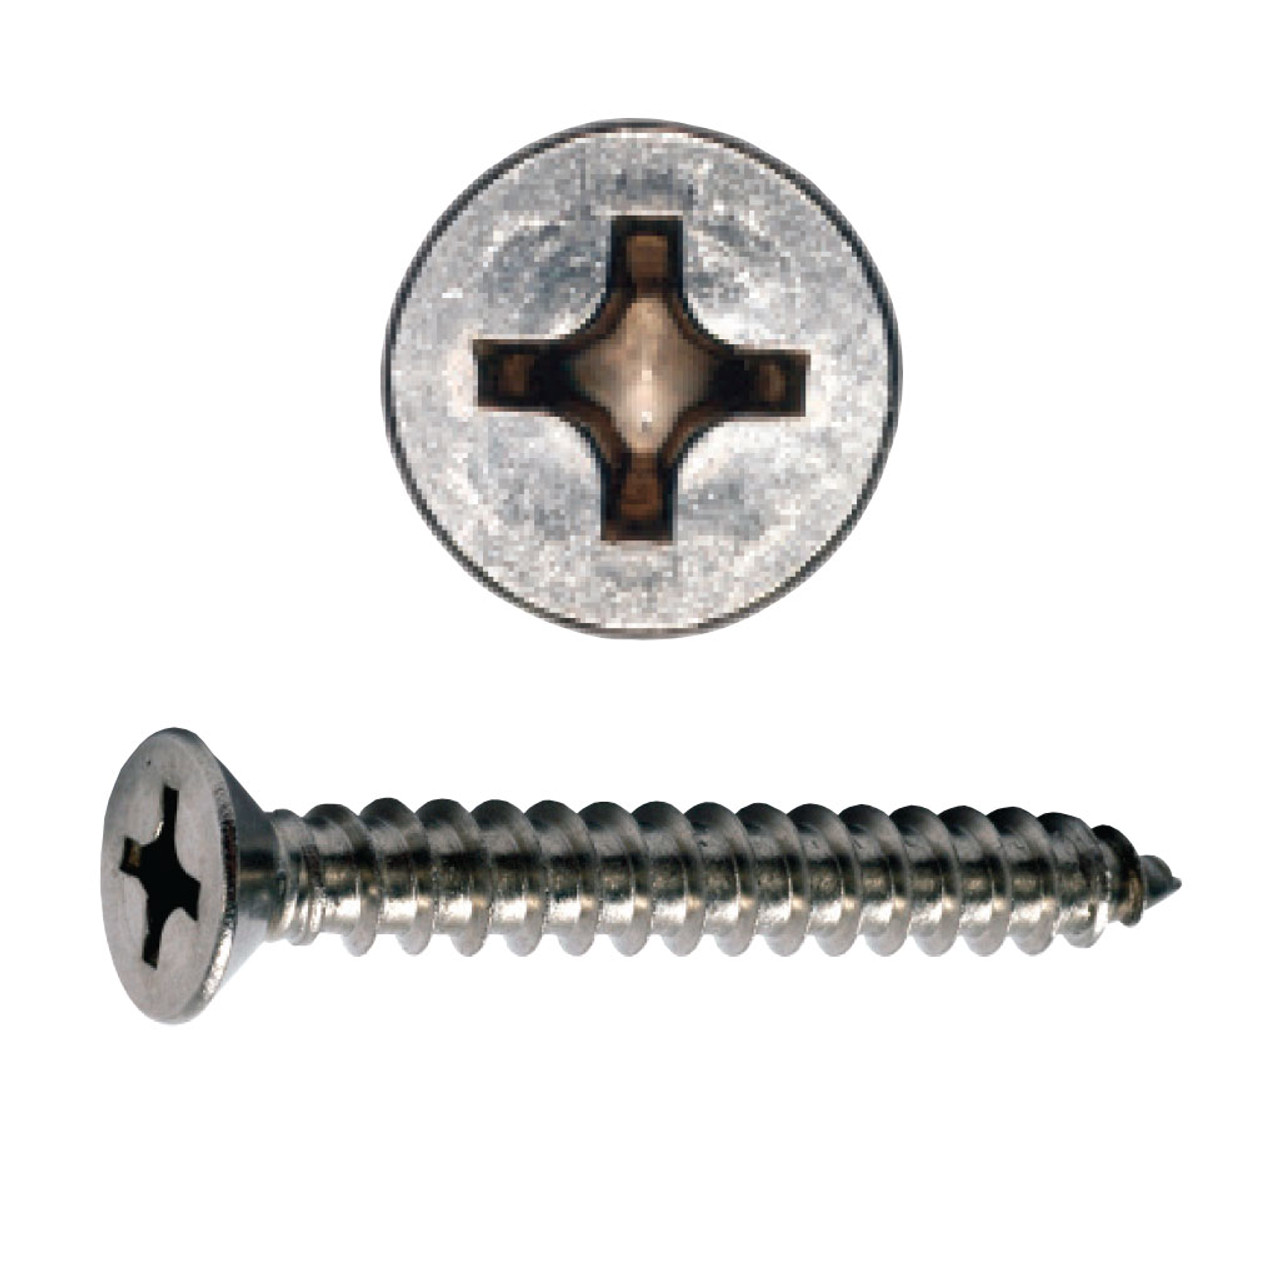 Details about   #14 x 1-1/2" Phillips Flat Head Sheet Metal Screws Stainless Steel Qty 100